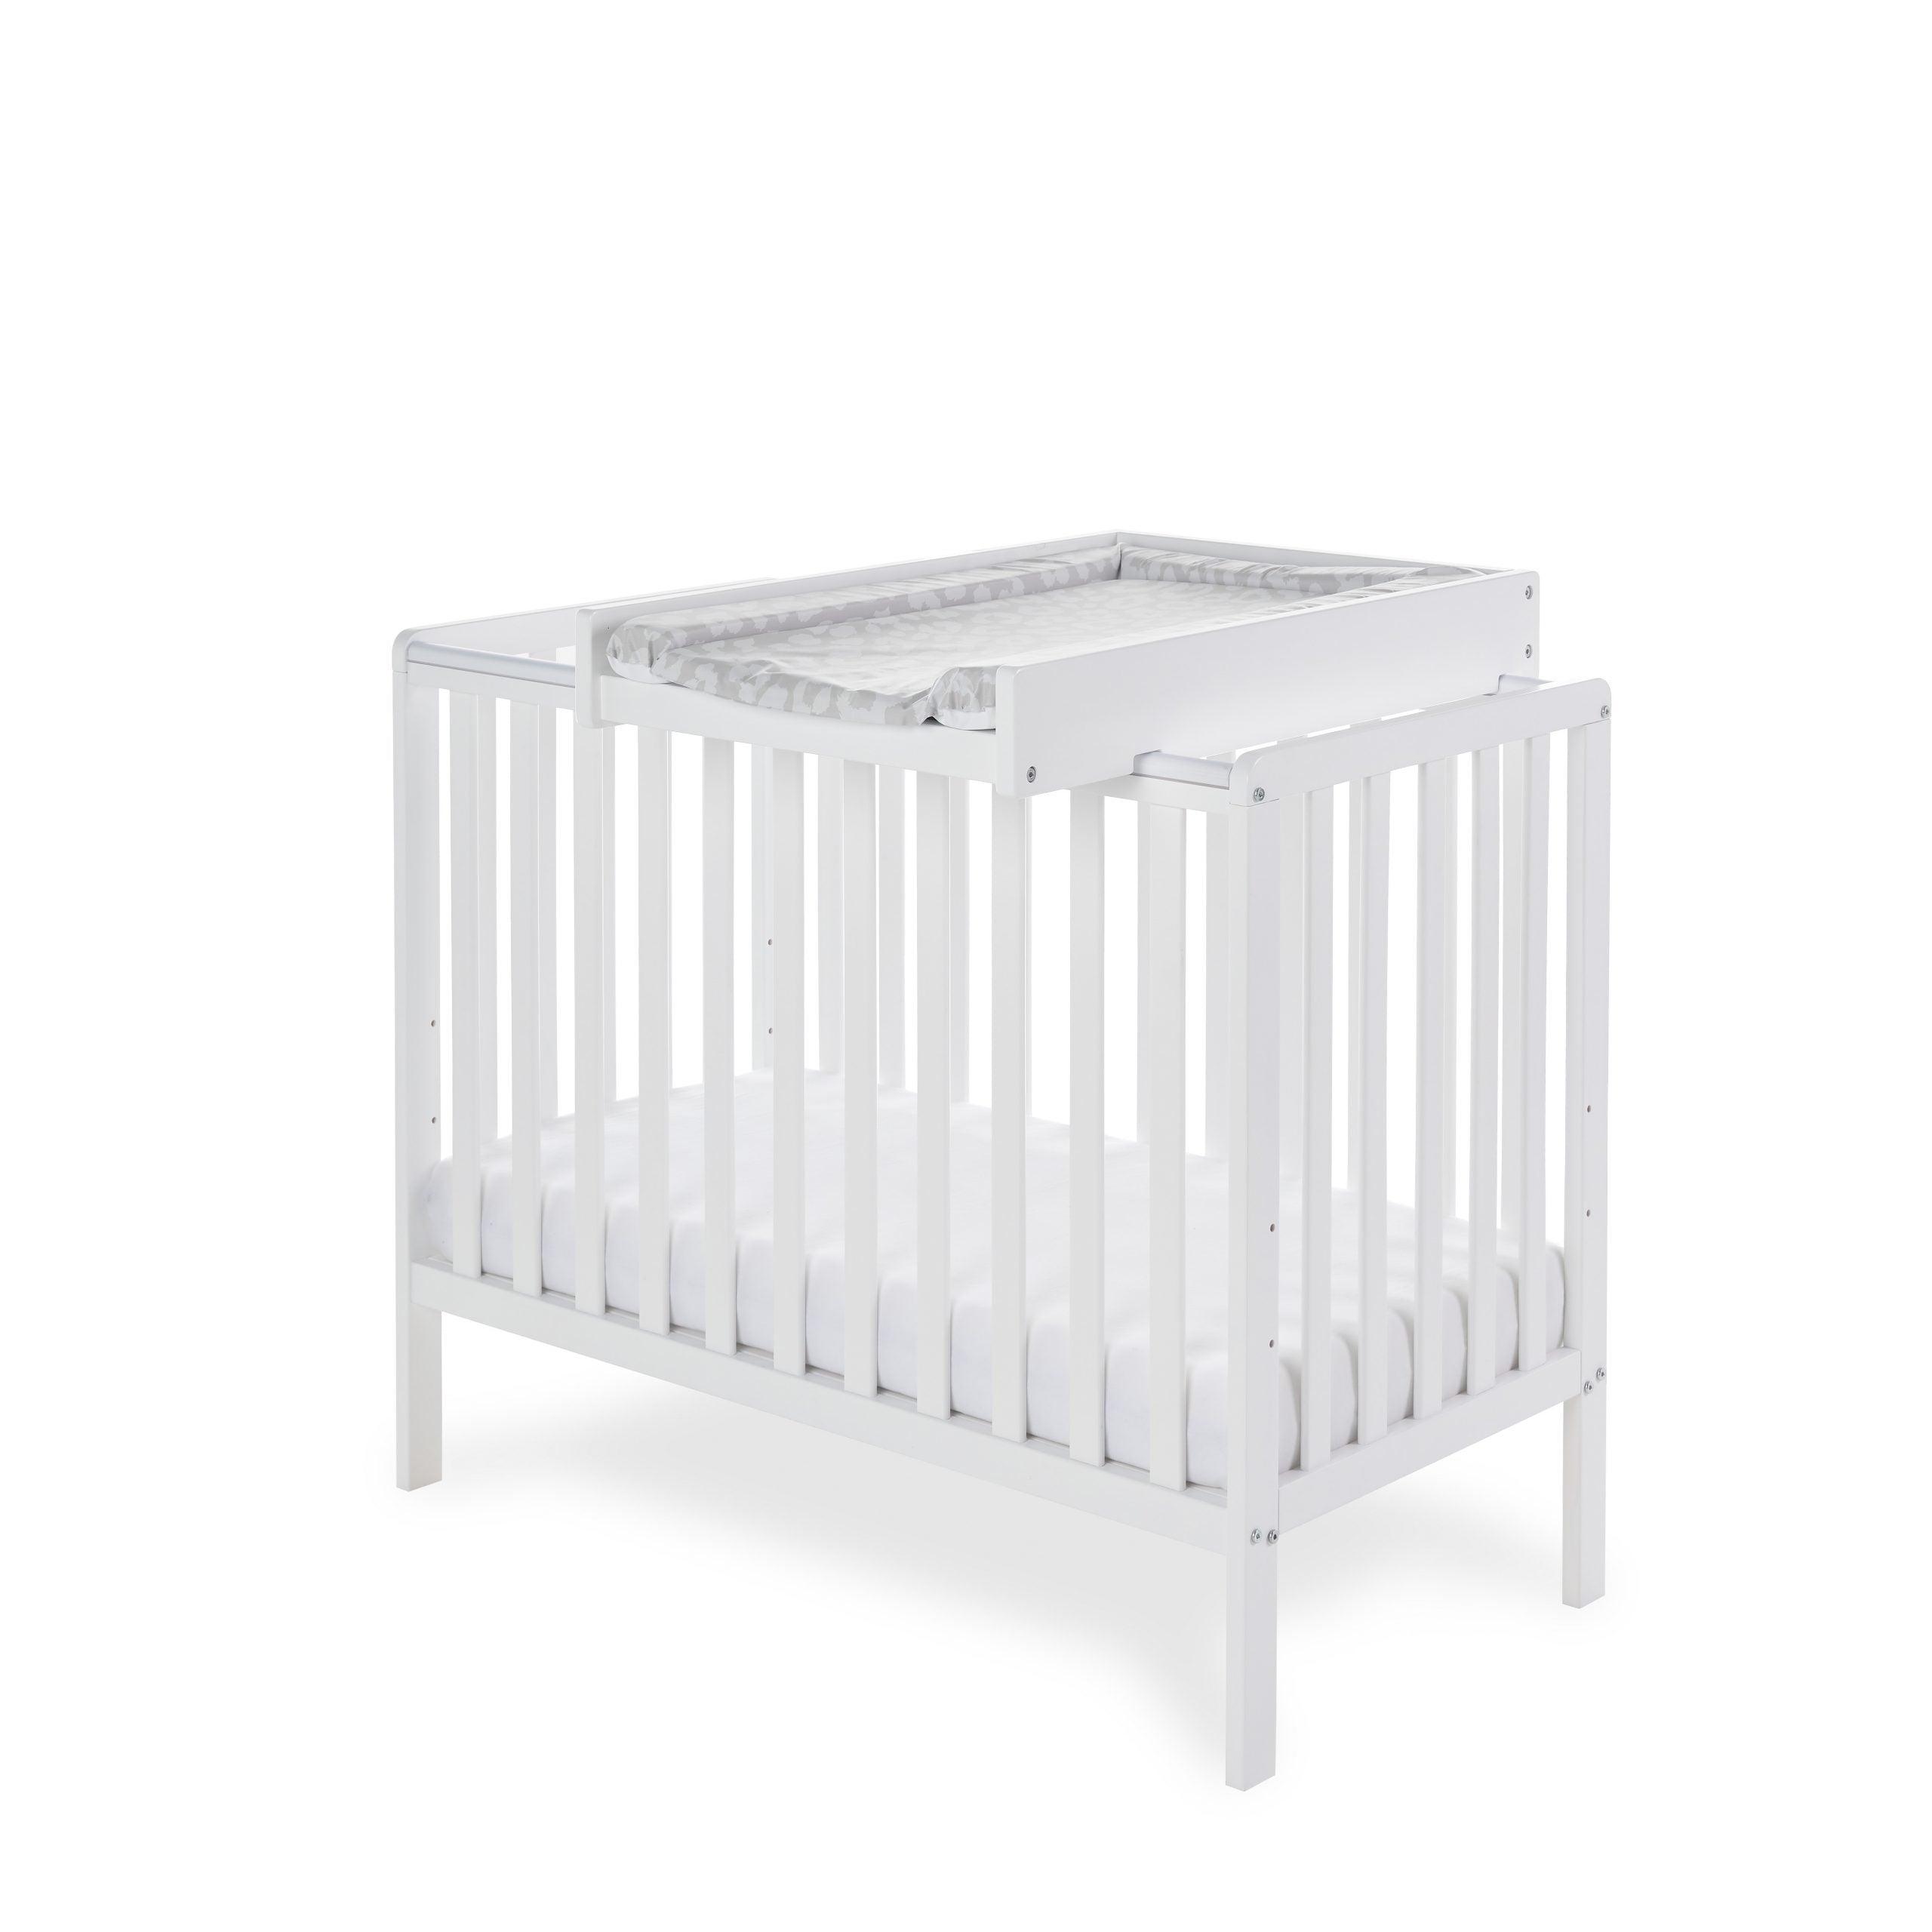 View Cot Top Changer White information